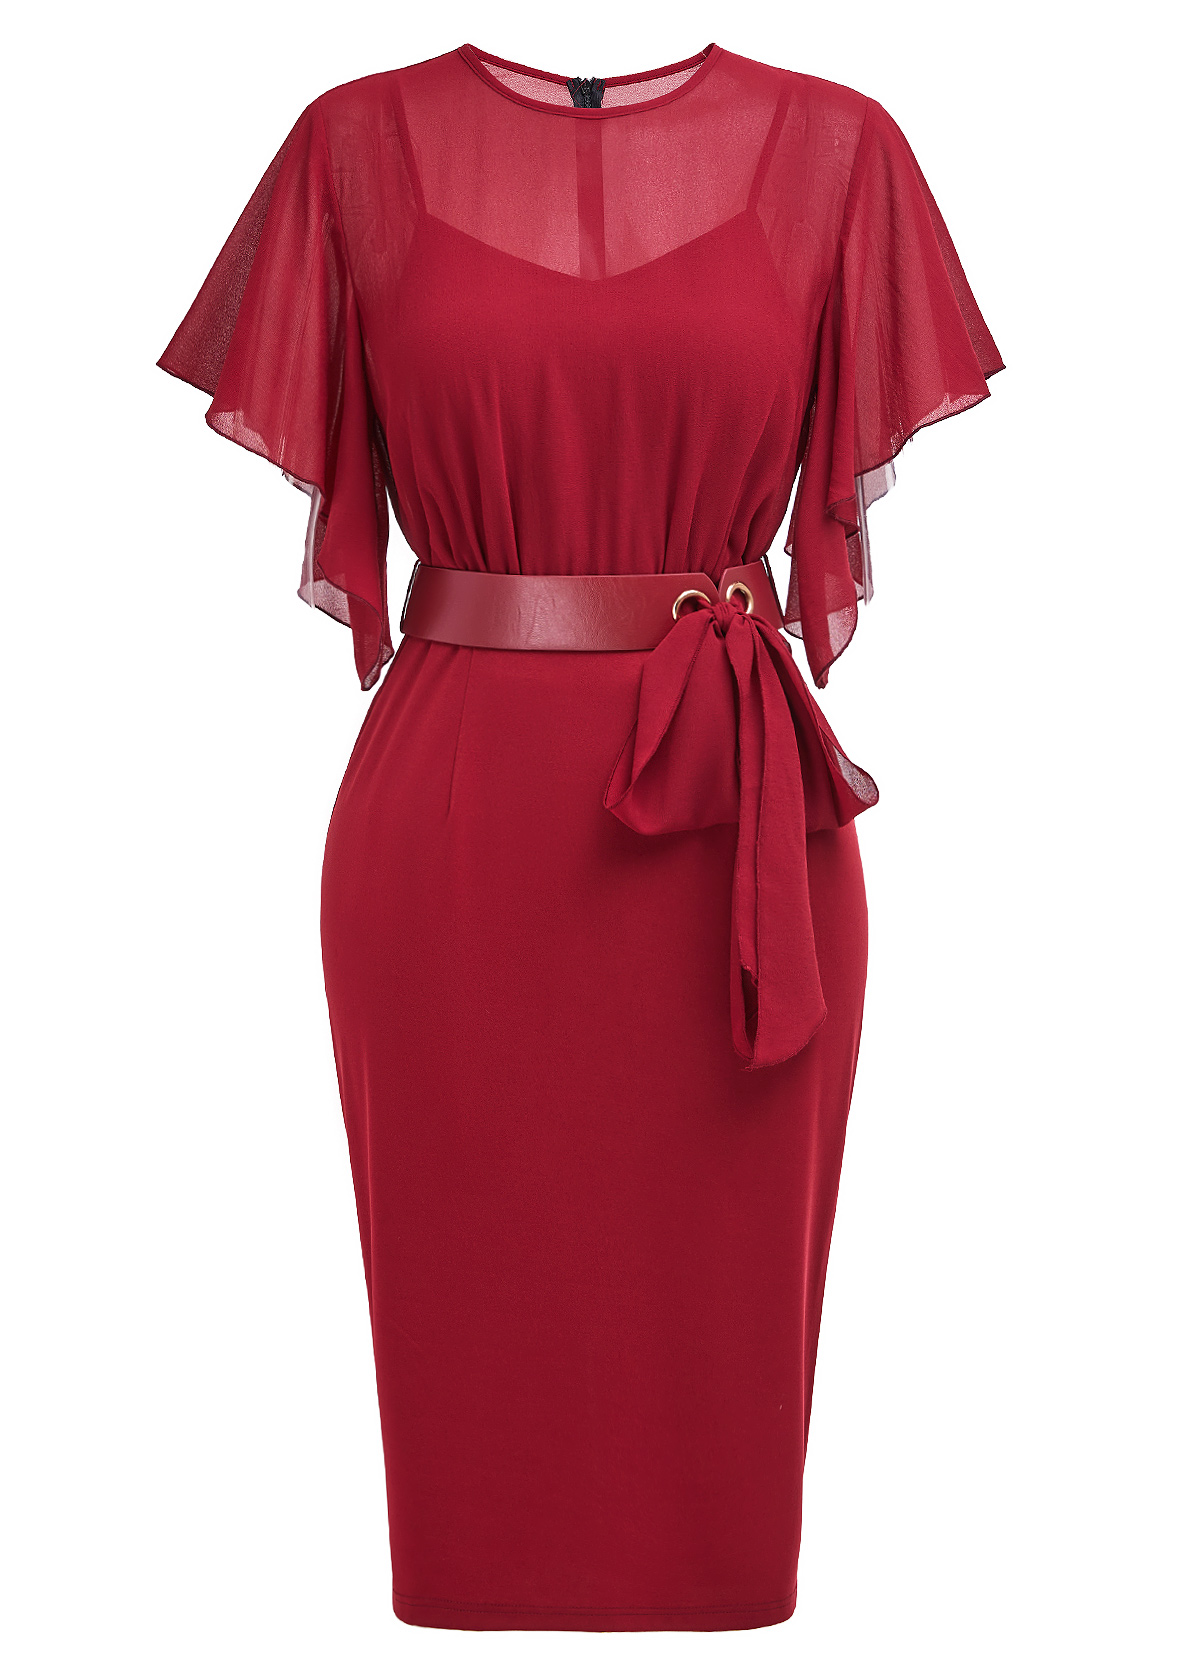 Wine Red Tie Belted Short Sleeve Bodycon Dress